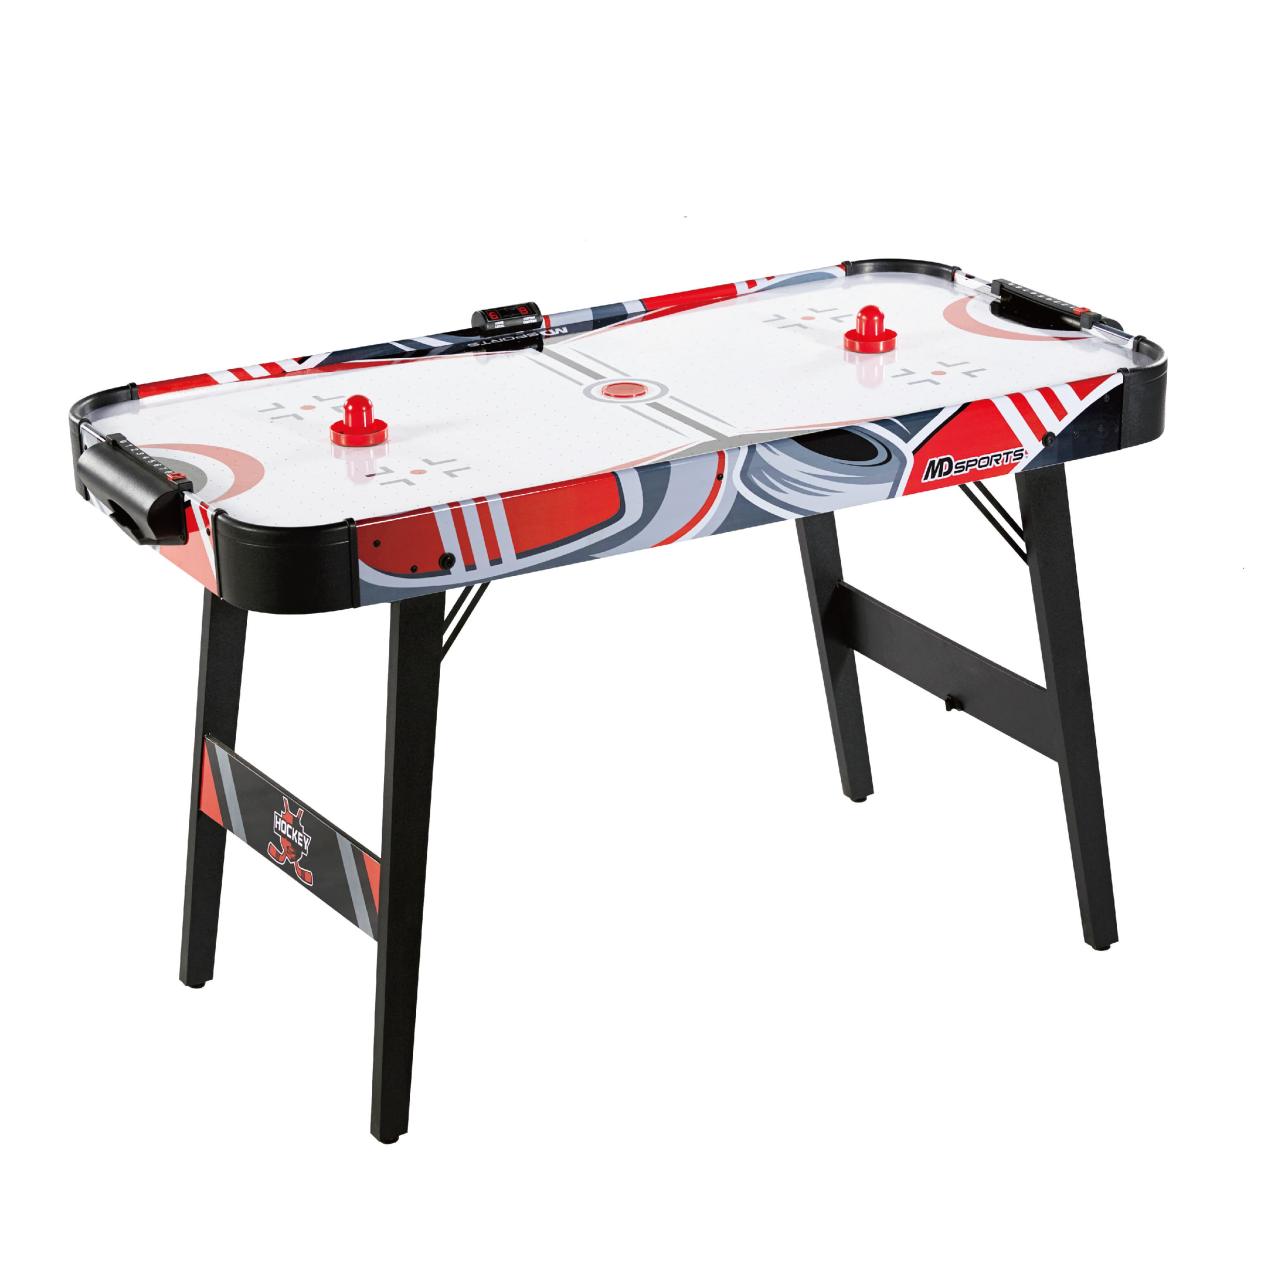 MD Sports Air Hockey Table: A Comprehensive Guide